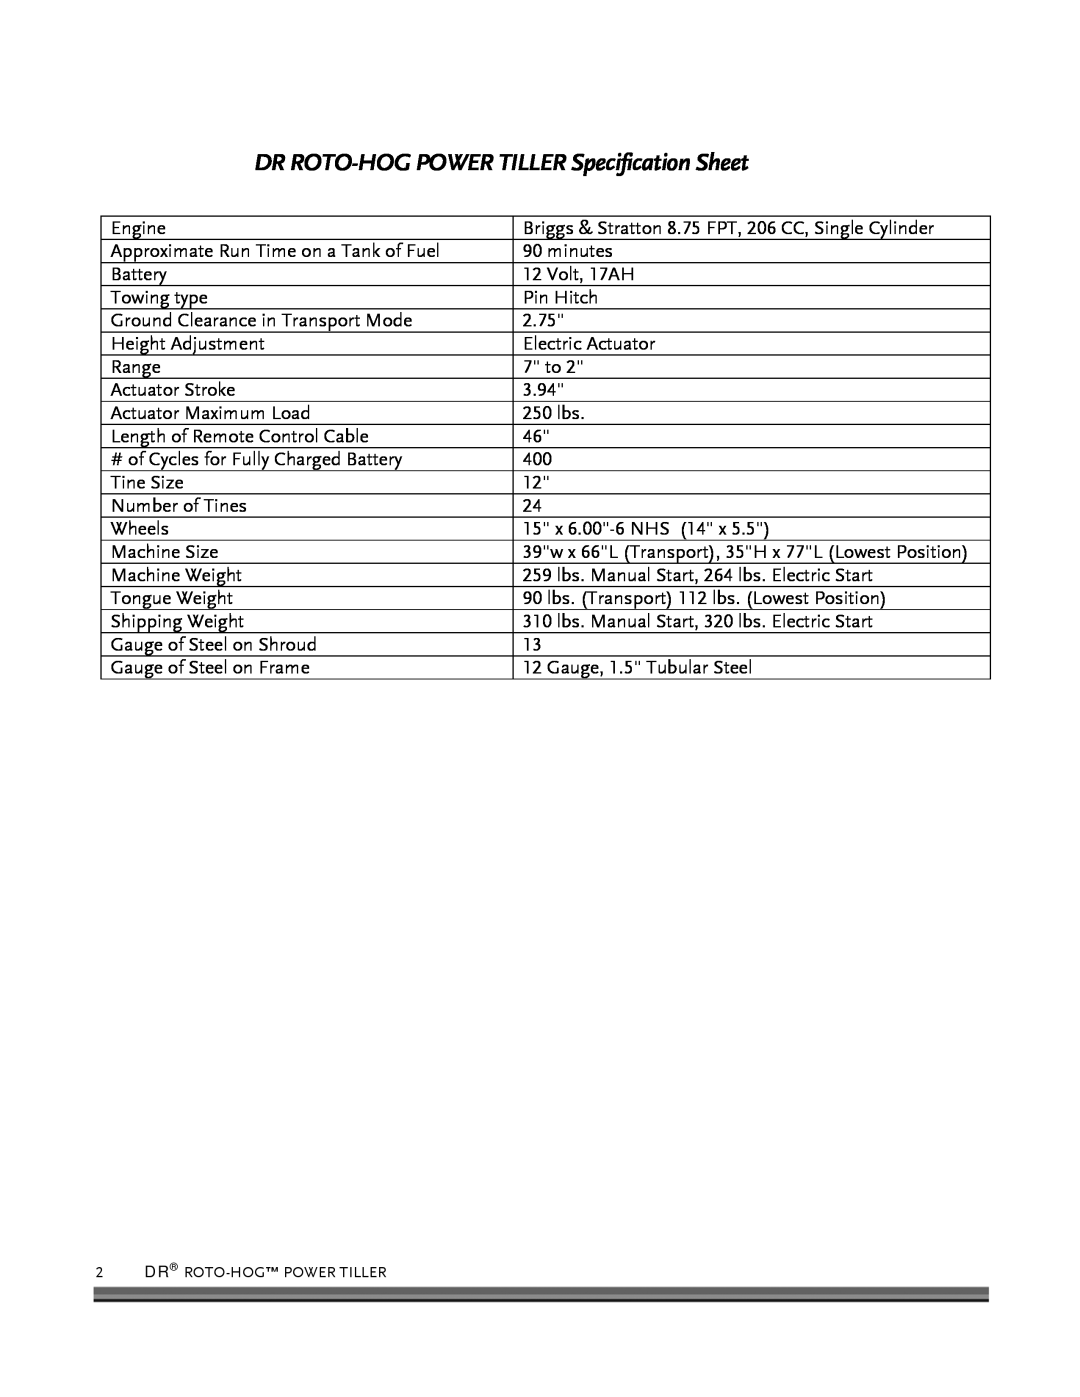 Country Home Products ROTO-HOGTM manual DR ROTO-HOGPOWER TILLER Specification Sheet 